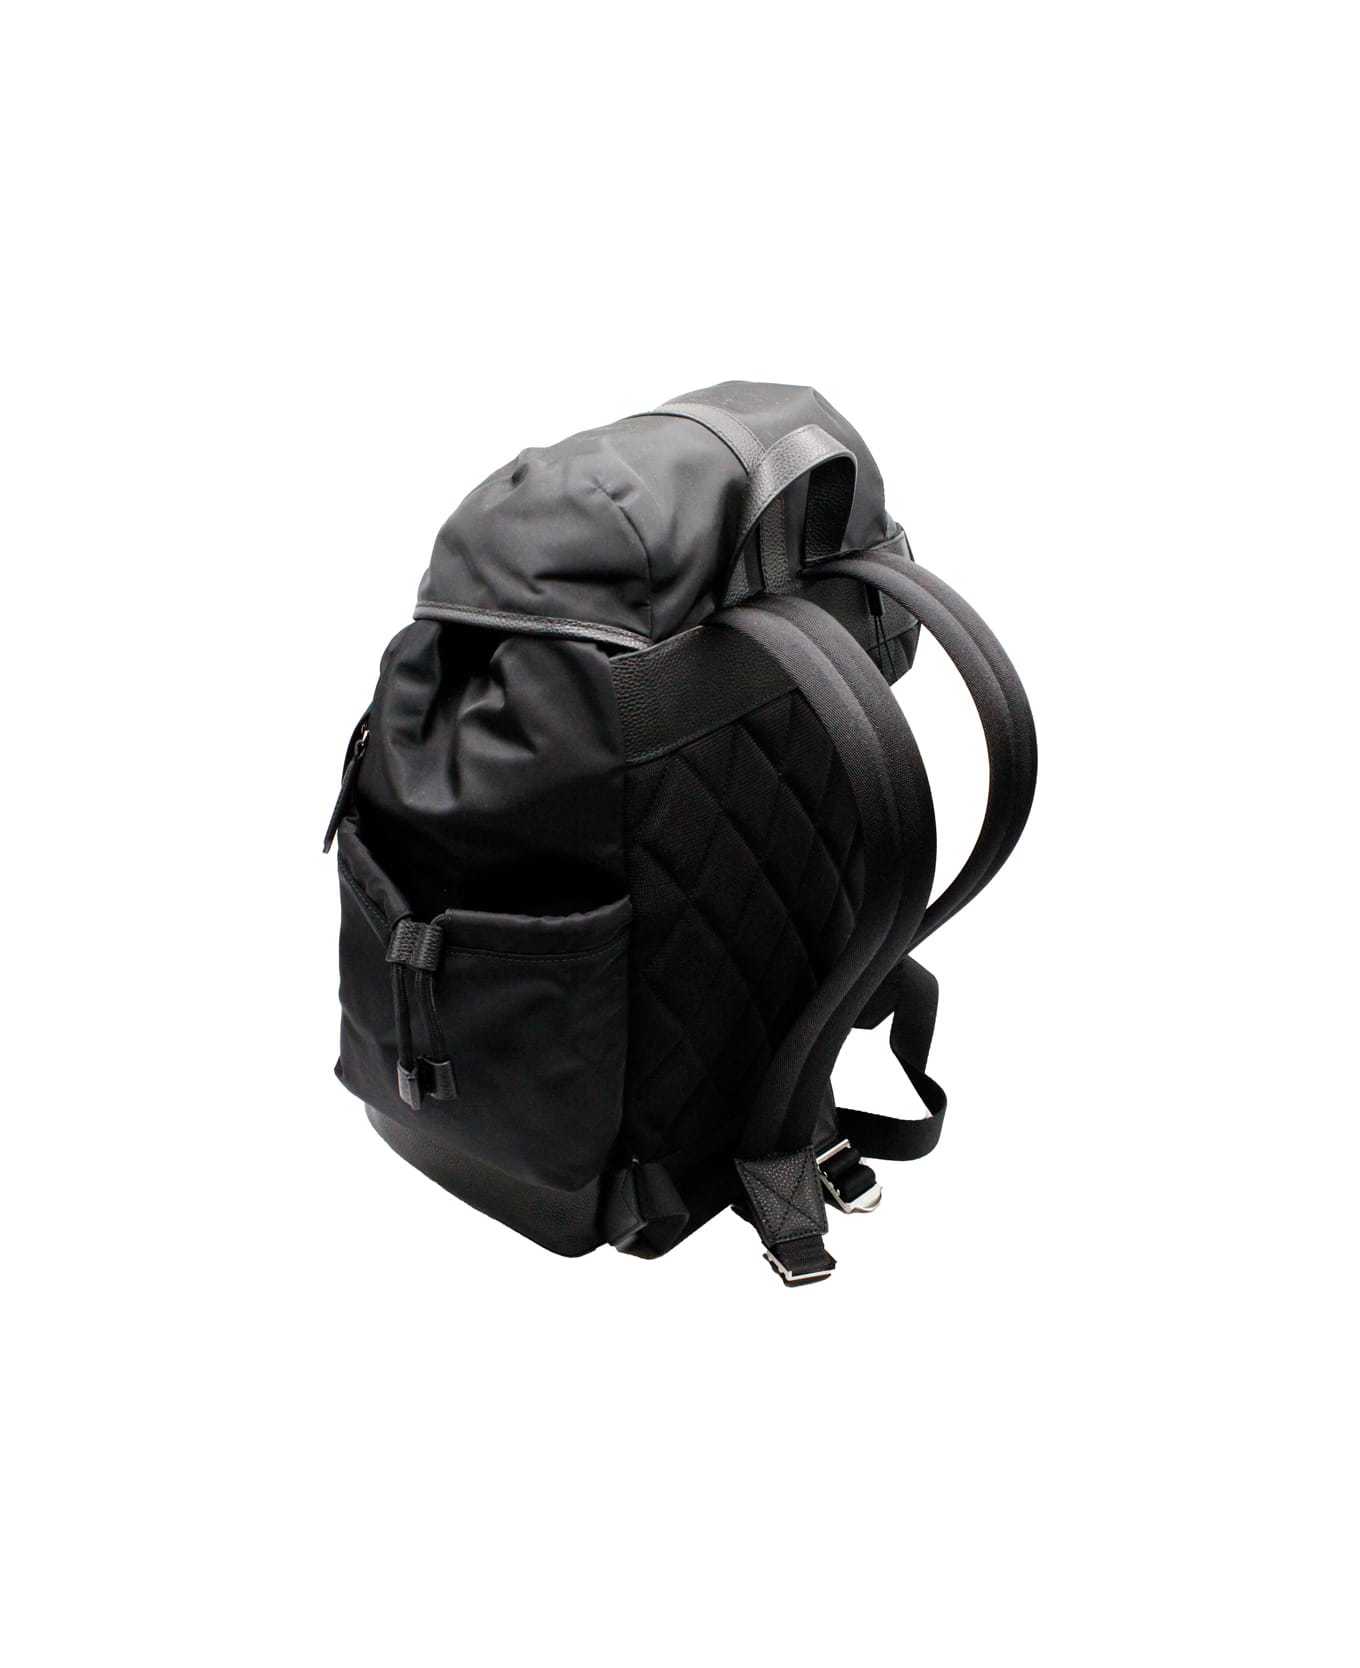 Burberry Recycled Nylon Backpack With Adjustable Shoulder Straps, Internal And External Pockets - Black